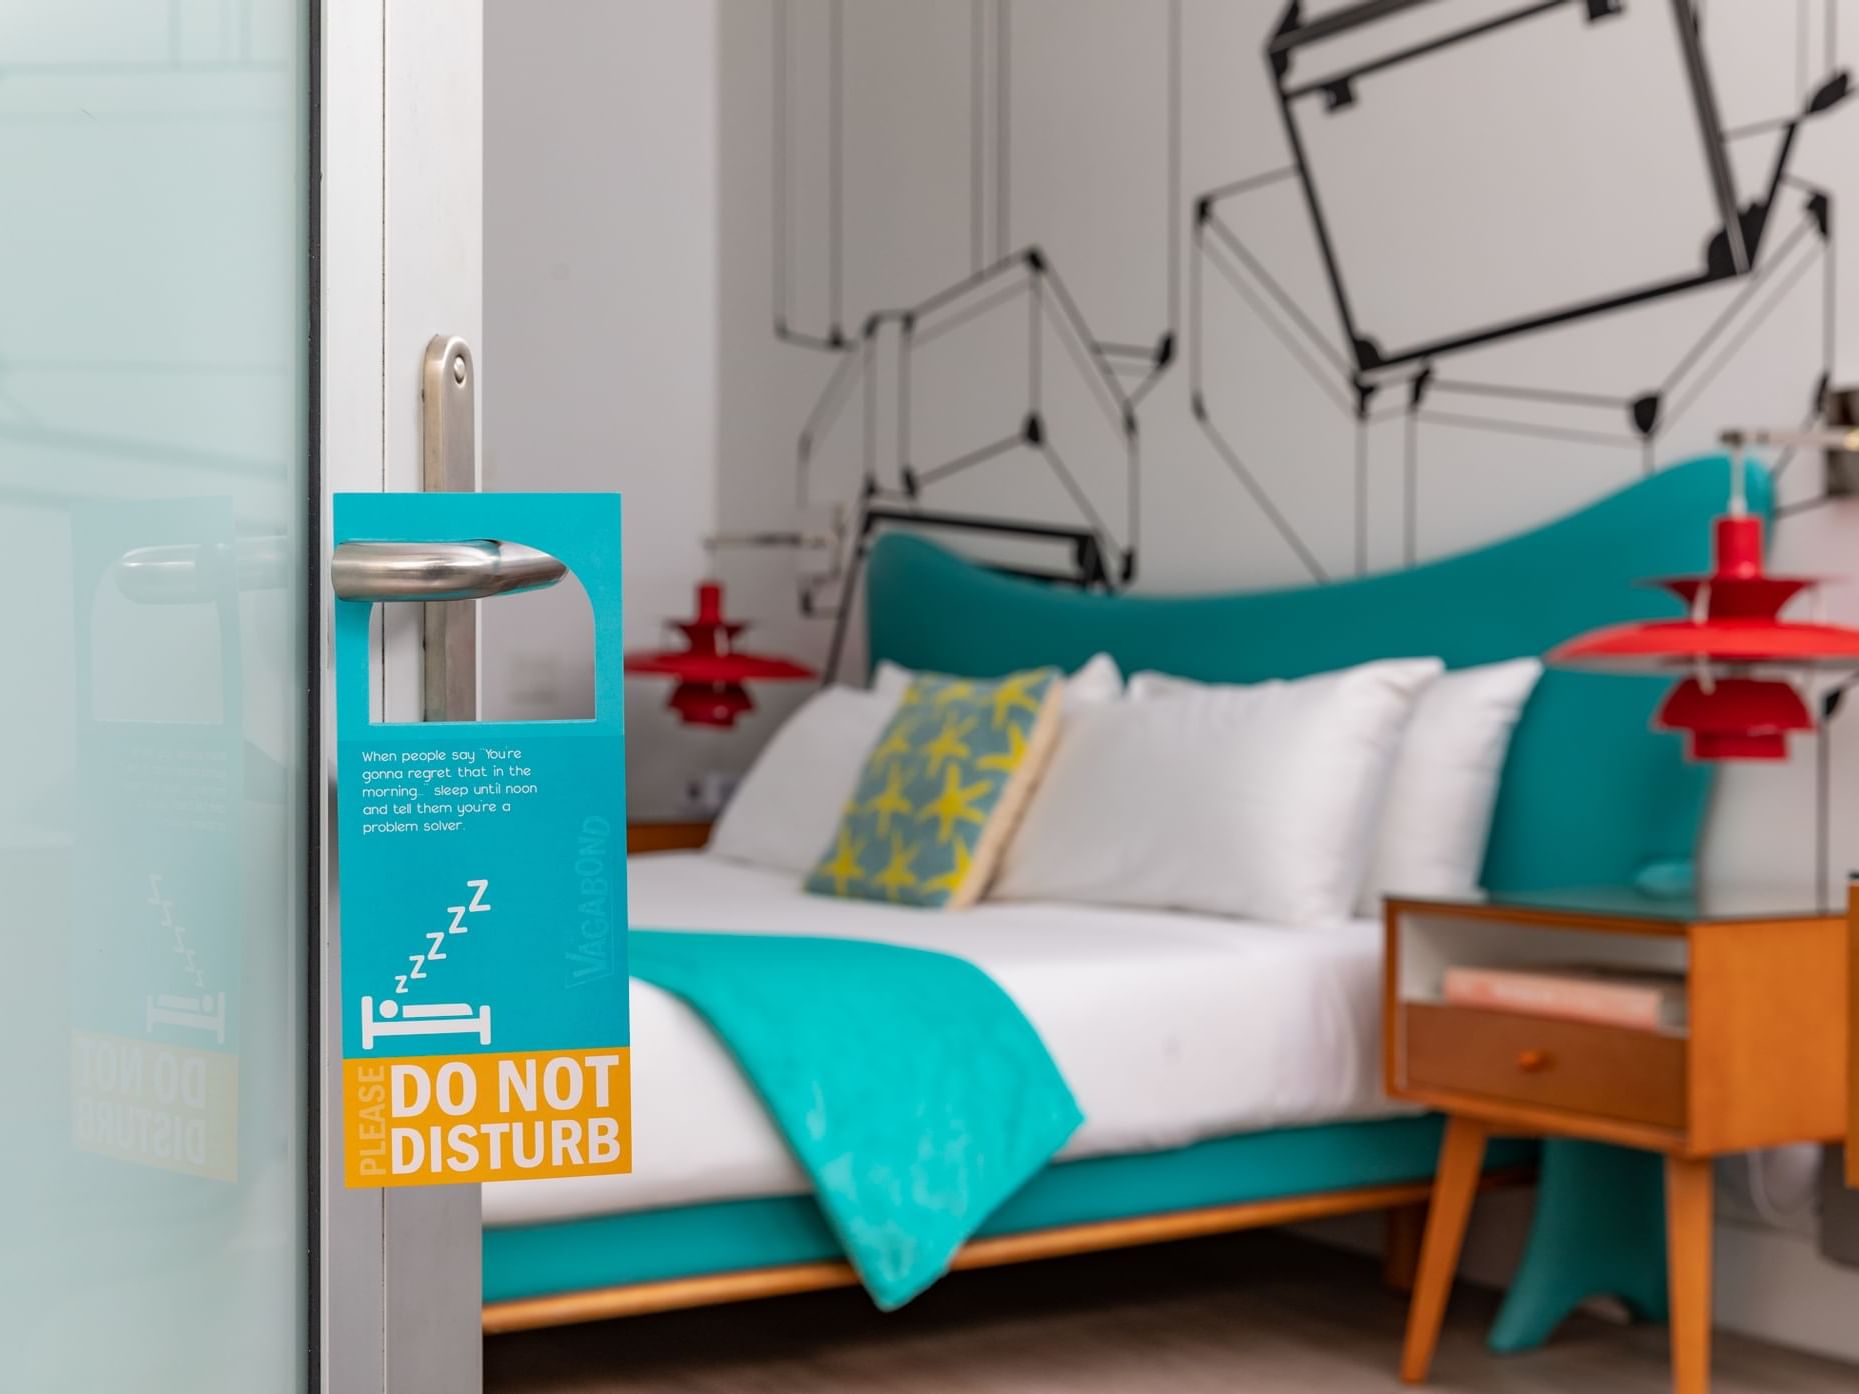 DO not disturb sign places on the door handle that is ajar with the King size bed in the background